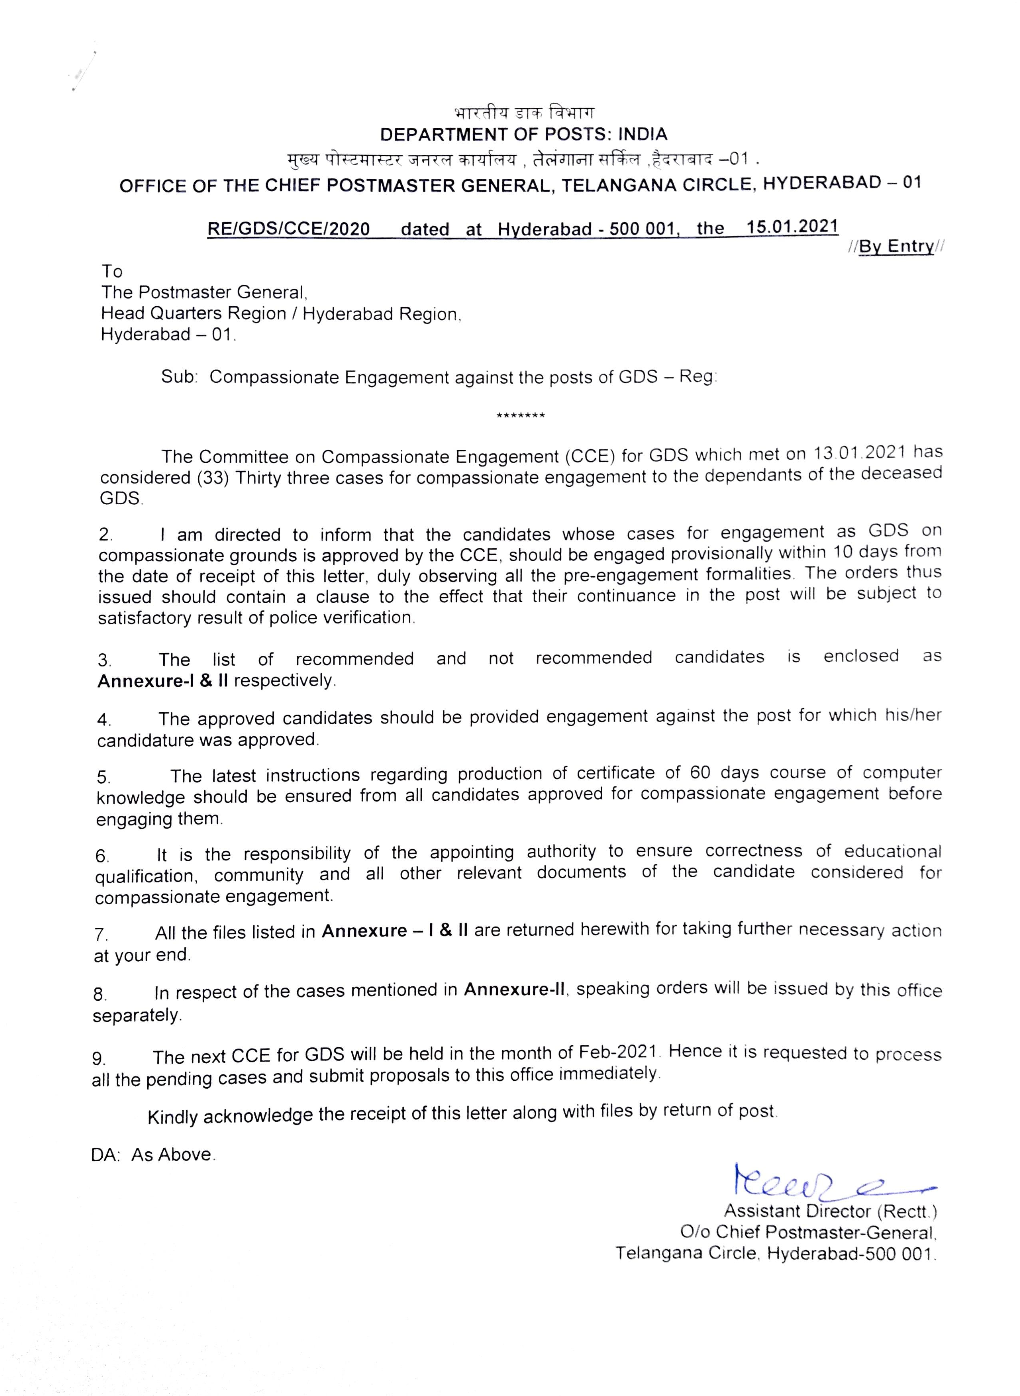 RE/GDS/CCE/2020 Dated at Hyderabad-500 001, the 15.01.2021 /By Entry/ to the Postmaster General Head Quarters Region / Hyderabad Region Hyderabad - 01